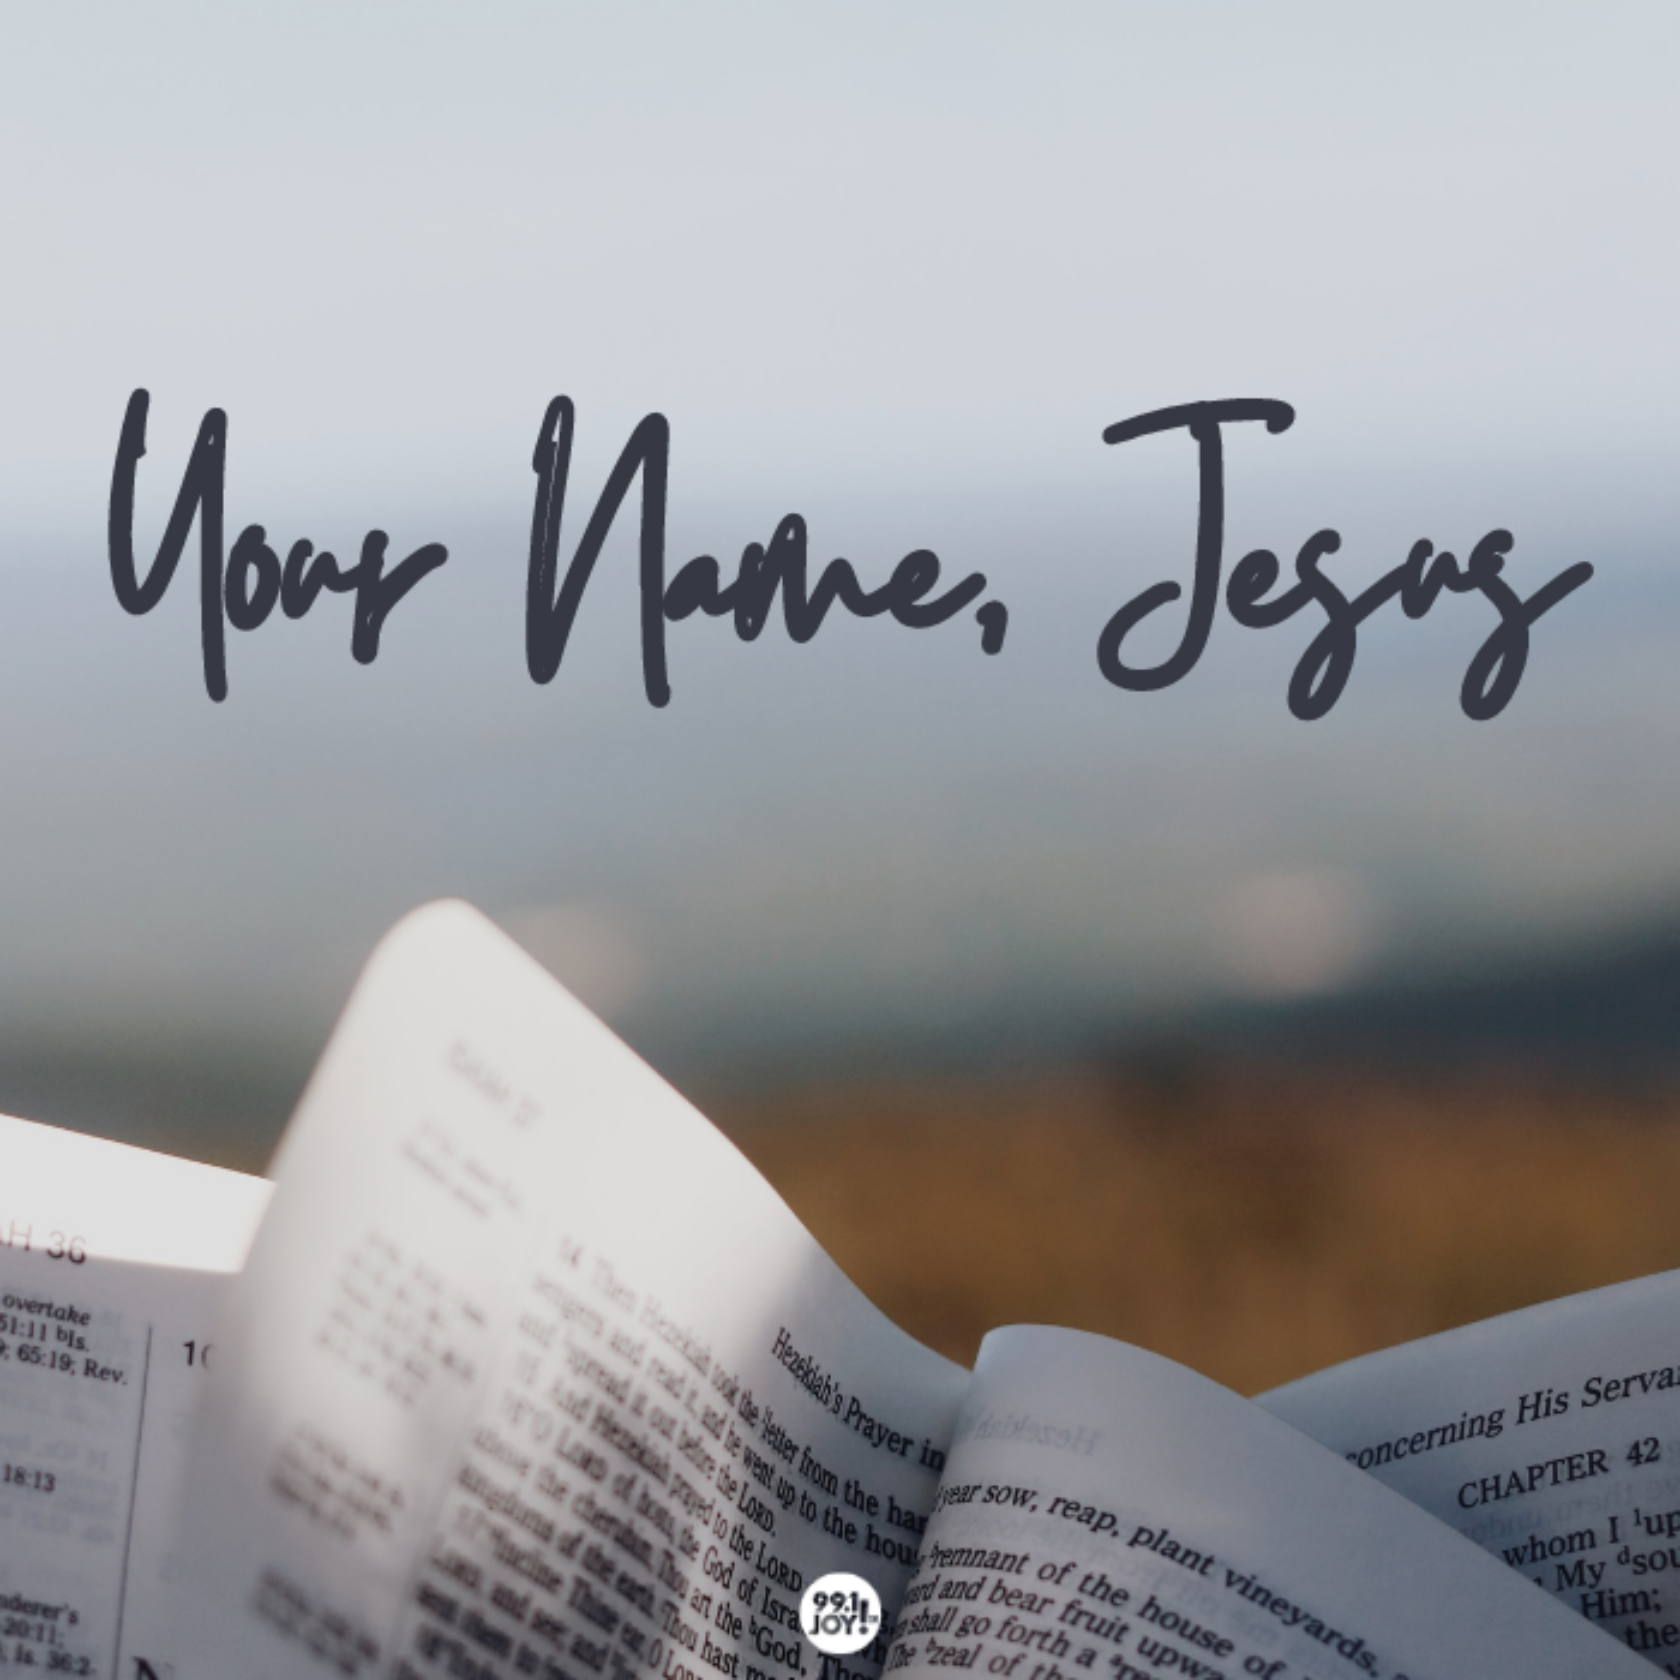 Your Name, Jesus